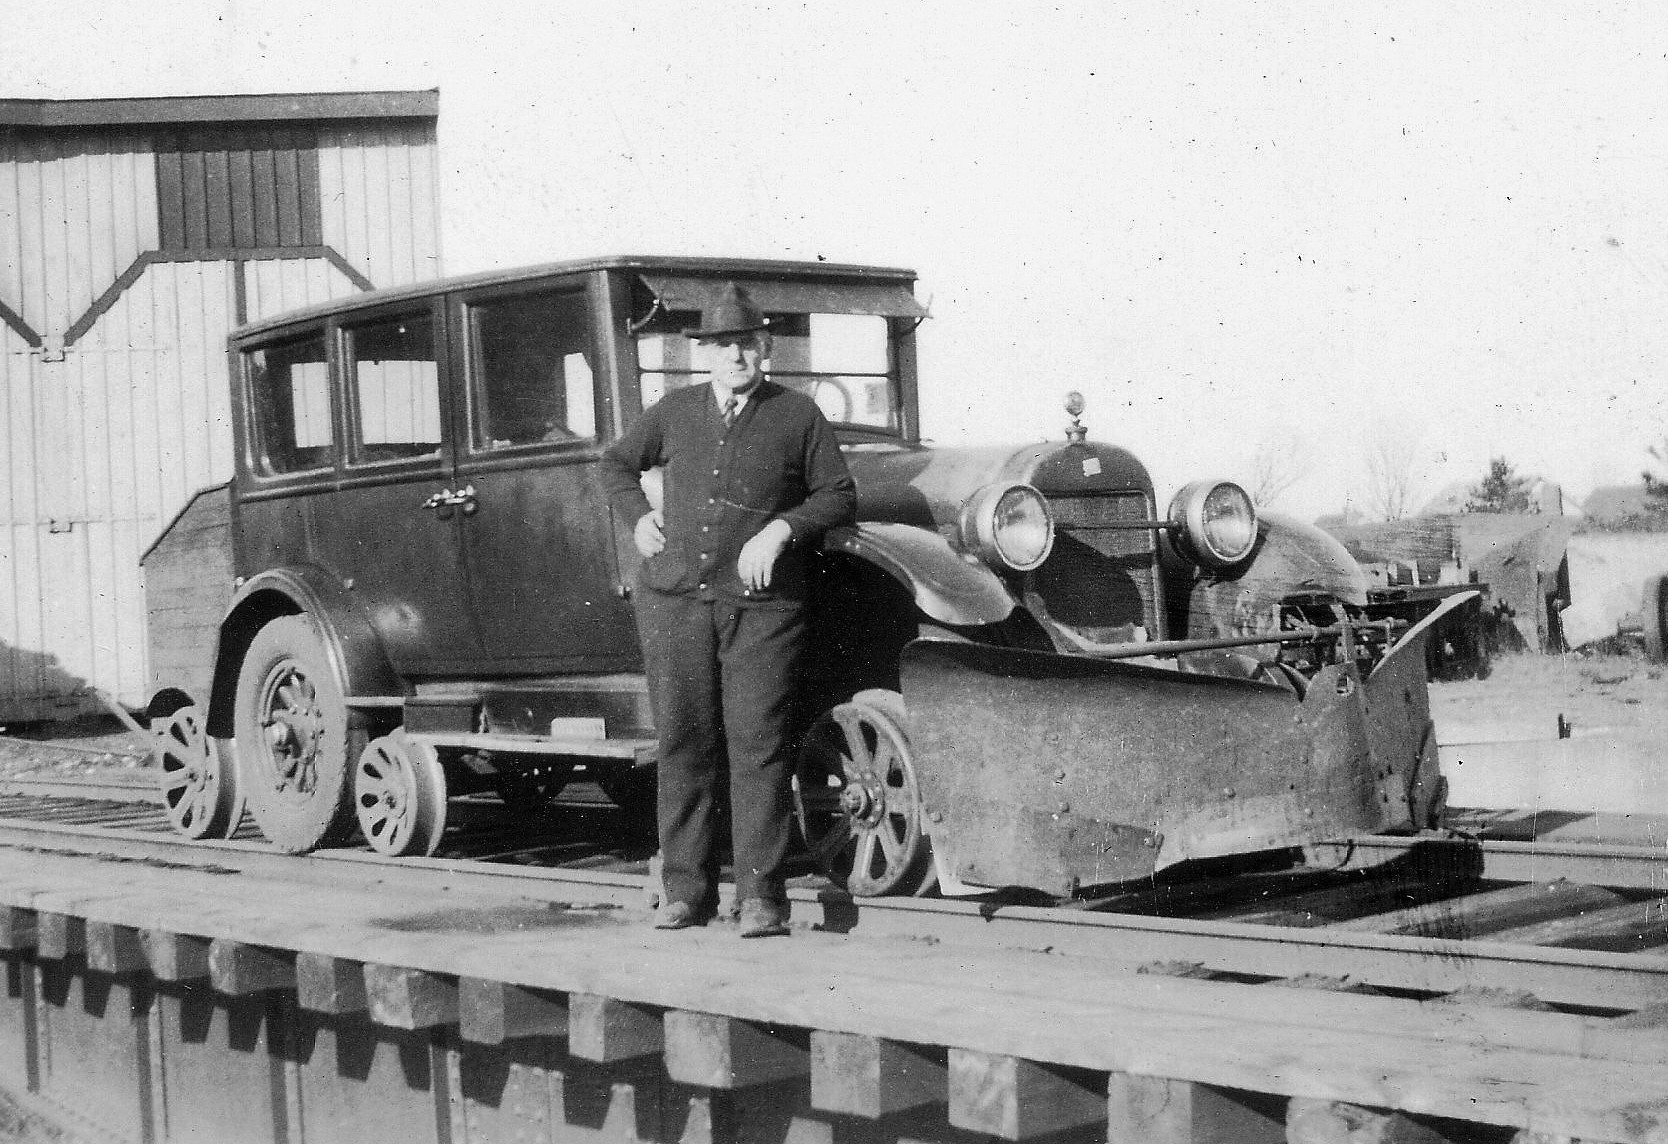 1936 photo of the mail car showing the snowplow mounted on the front. Niles/Helmka Family Collection